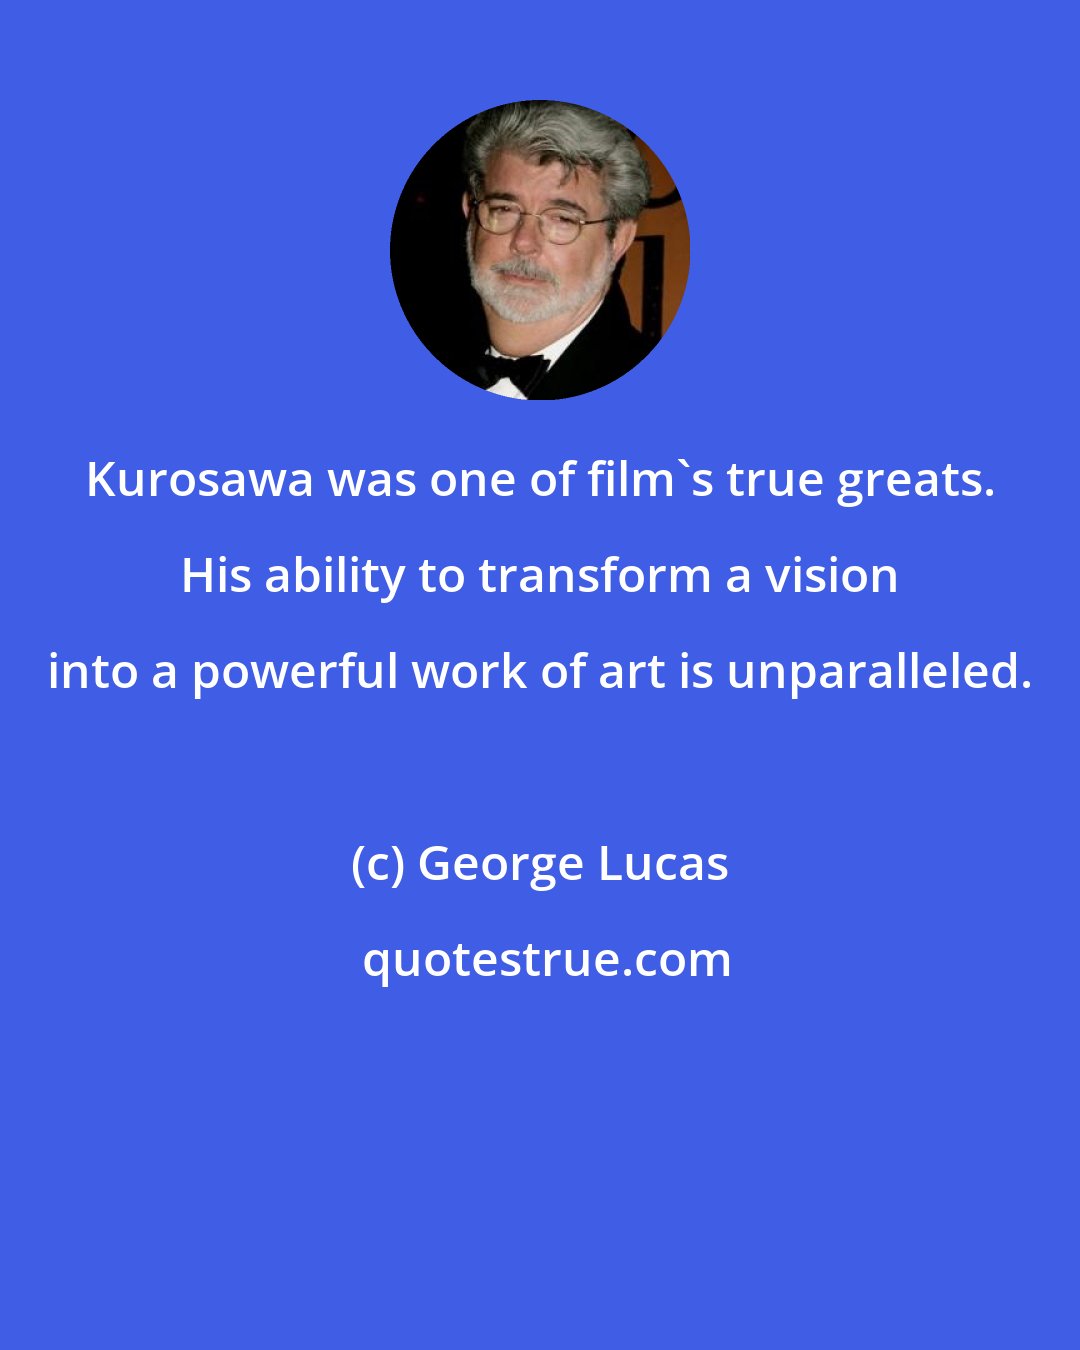 George Lucas: Kurosawa was one of film's true greats. His ability to transform a vision into a powerful work of art is unparalleled.